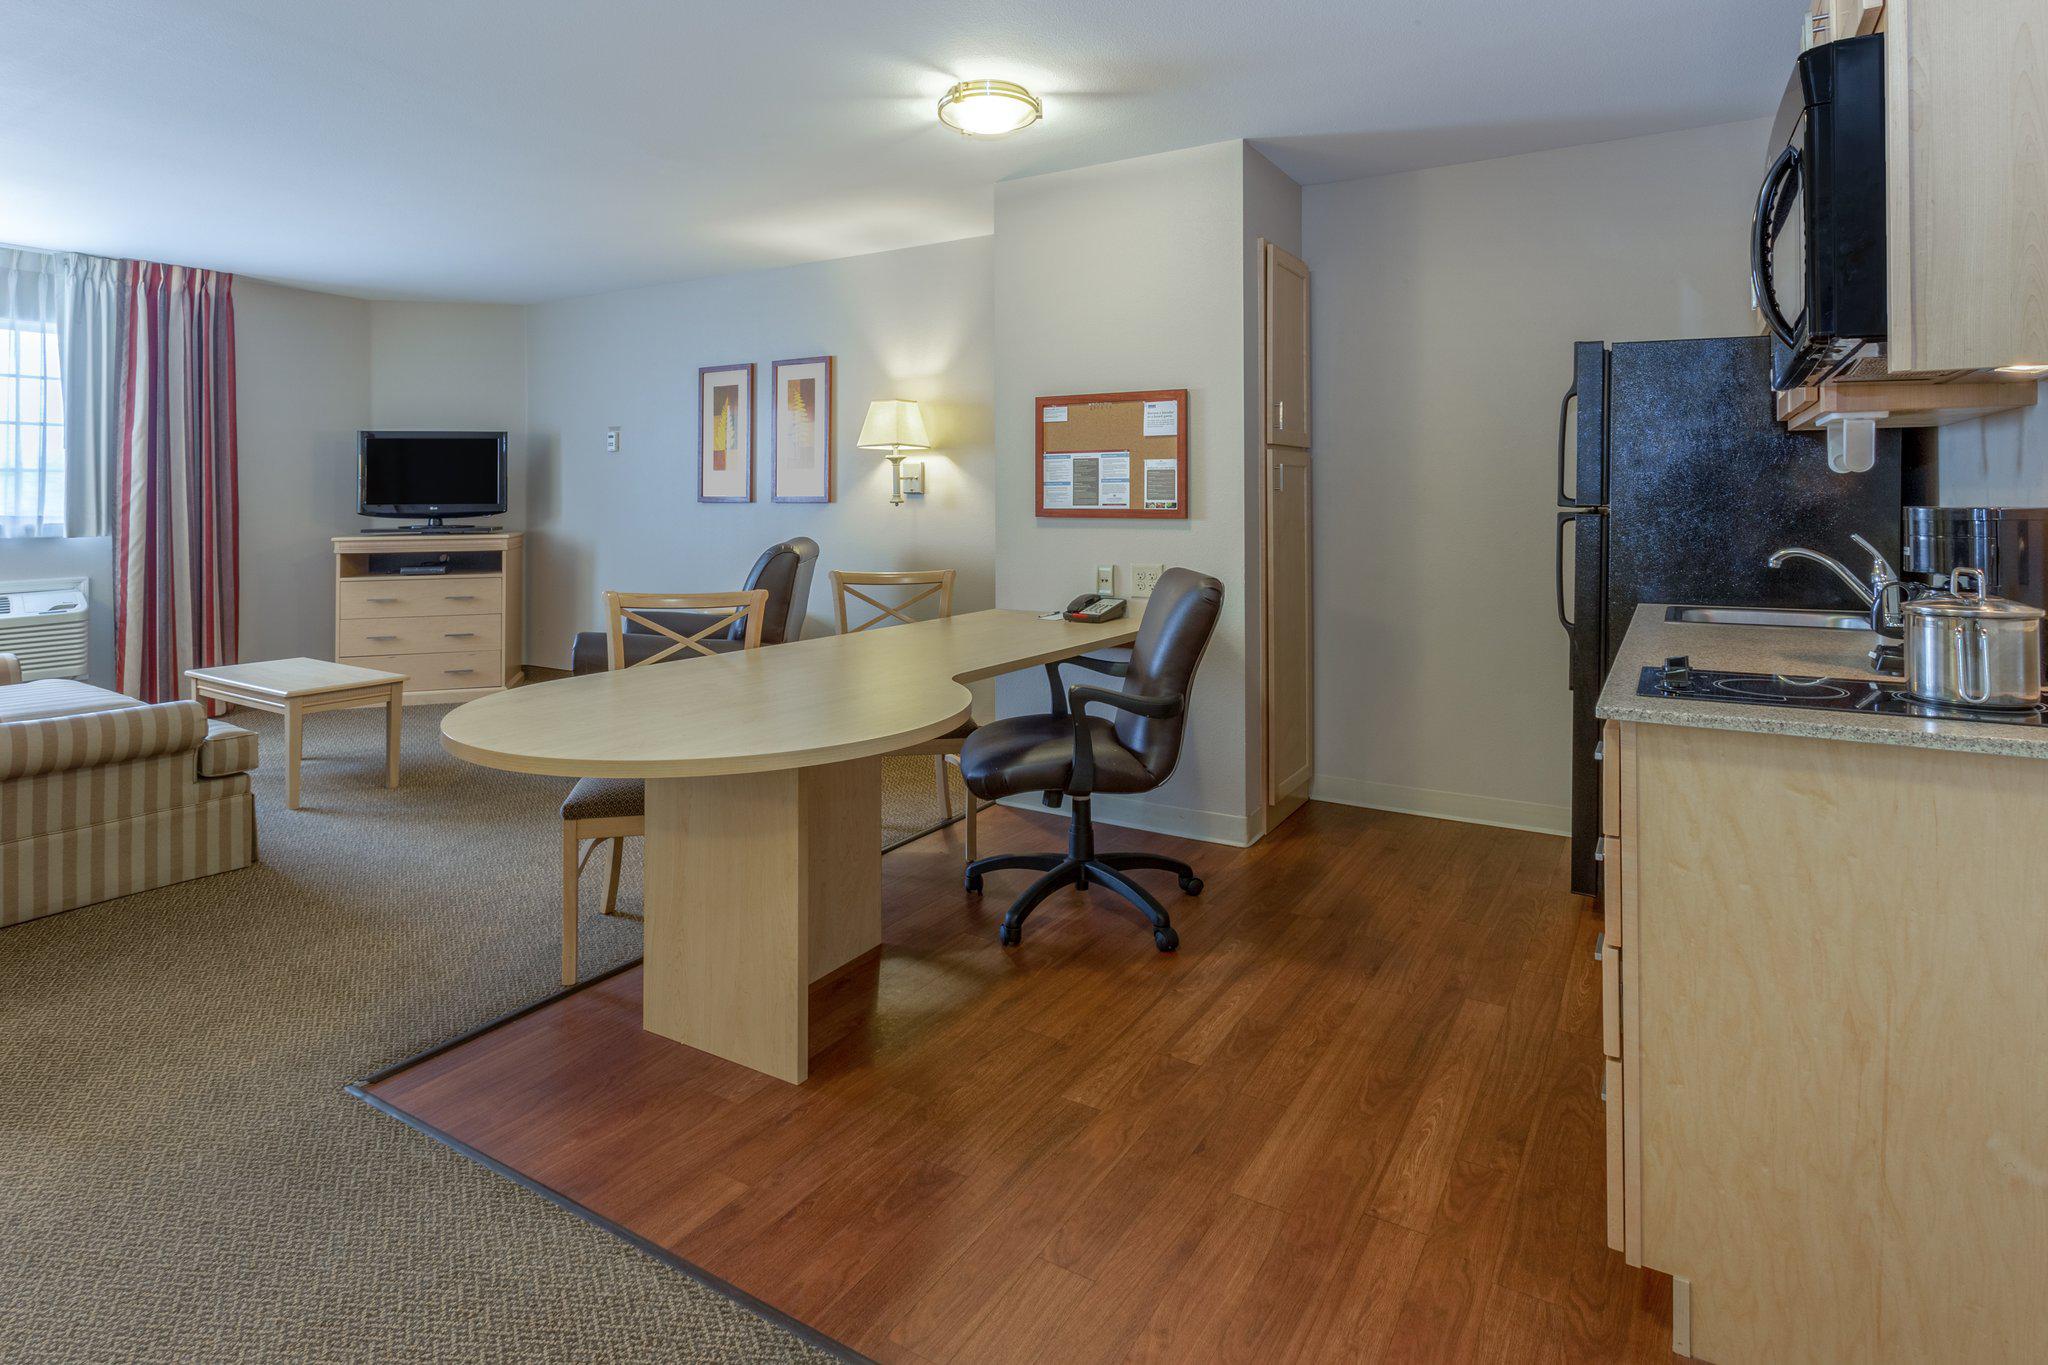 Candlewood Suites Minot Photo